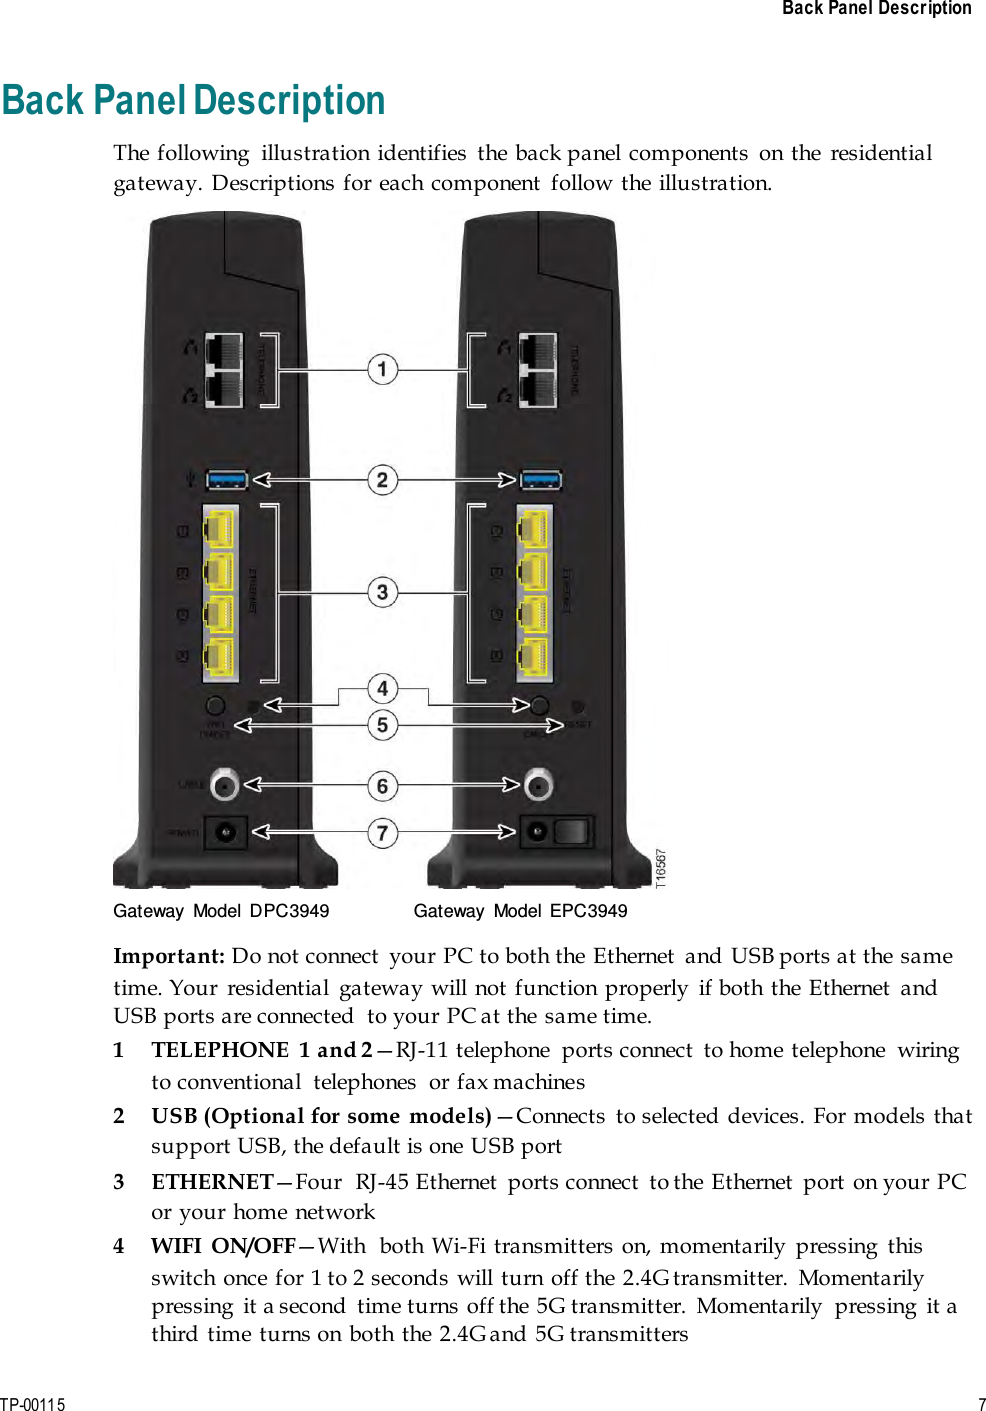 Back Panel Description TP-00115   7 Back Panel Description The following  illustration identifies  the back panel  components  on the  residential gateway. Descriptions  for each component  follow the illustration. Gateway  Model DPC3949  Gateway  Model EPC3949 Important: Do not connect  your PC to both the Ethernet  and USB ports at the same time. Your  residential  gateway will not function  properly  if both the Ethernet  and USB ports are connected  to your  PC at the same time. 1 TELEPHONE  1 and 2—RJ-11 telephone  ports connect  to home telephone  wiring to conventional  telephones  or  fax machines 2 USB (Optional for some  models)—Connects  to selected devices. For  models that support USB, the default is one USB port 3 ETHERNET—Four  RJ-45 Ethernet  ports connect  to the Ethernet  port  on your PC or your home network 4 WIFI  ON/OFF—With  both Wi-Fi transmitters on, momentarily  pressing  this switch once for 1 to 2 seconds will turn  off the 2.4G transmitter.  Momentarily pressing  it a second  time turns off the 5G transmitter.  Momentarily  pressing  it a third  time turns on both the 2.4G and 5G transmitters 